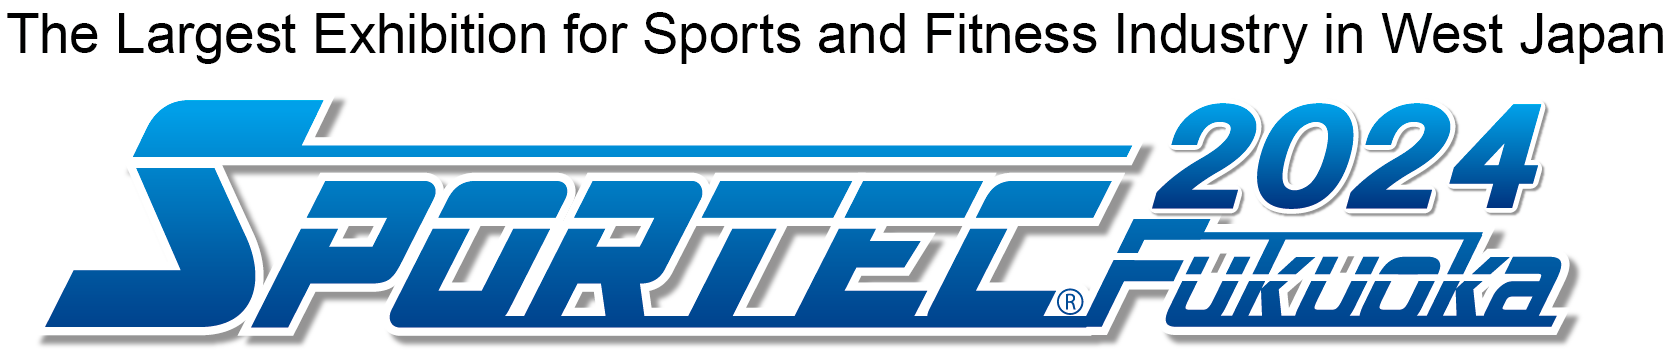 SPORTEC Fukuoka | The largest exhibition for sports and fitness industry in West Japan